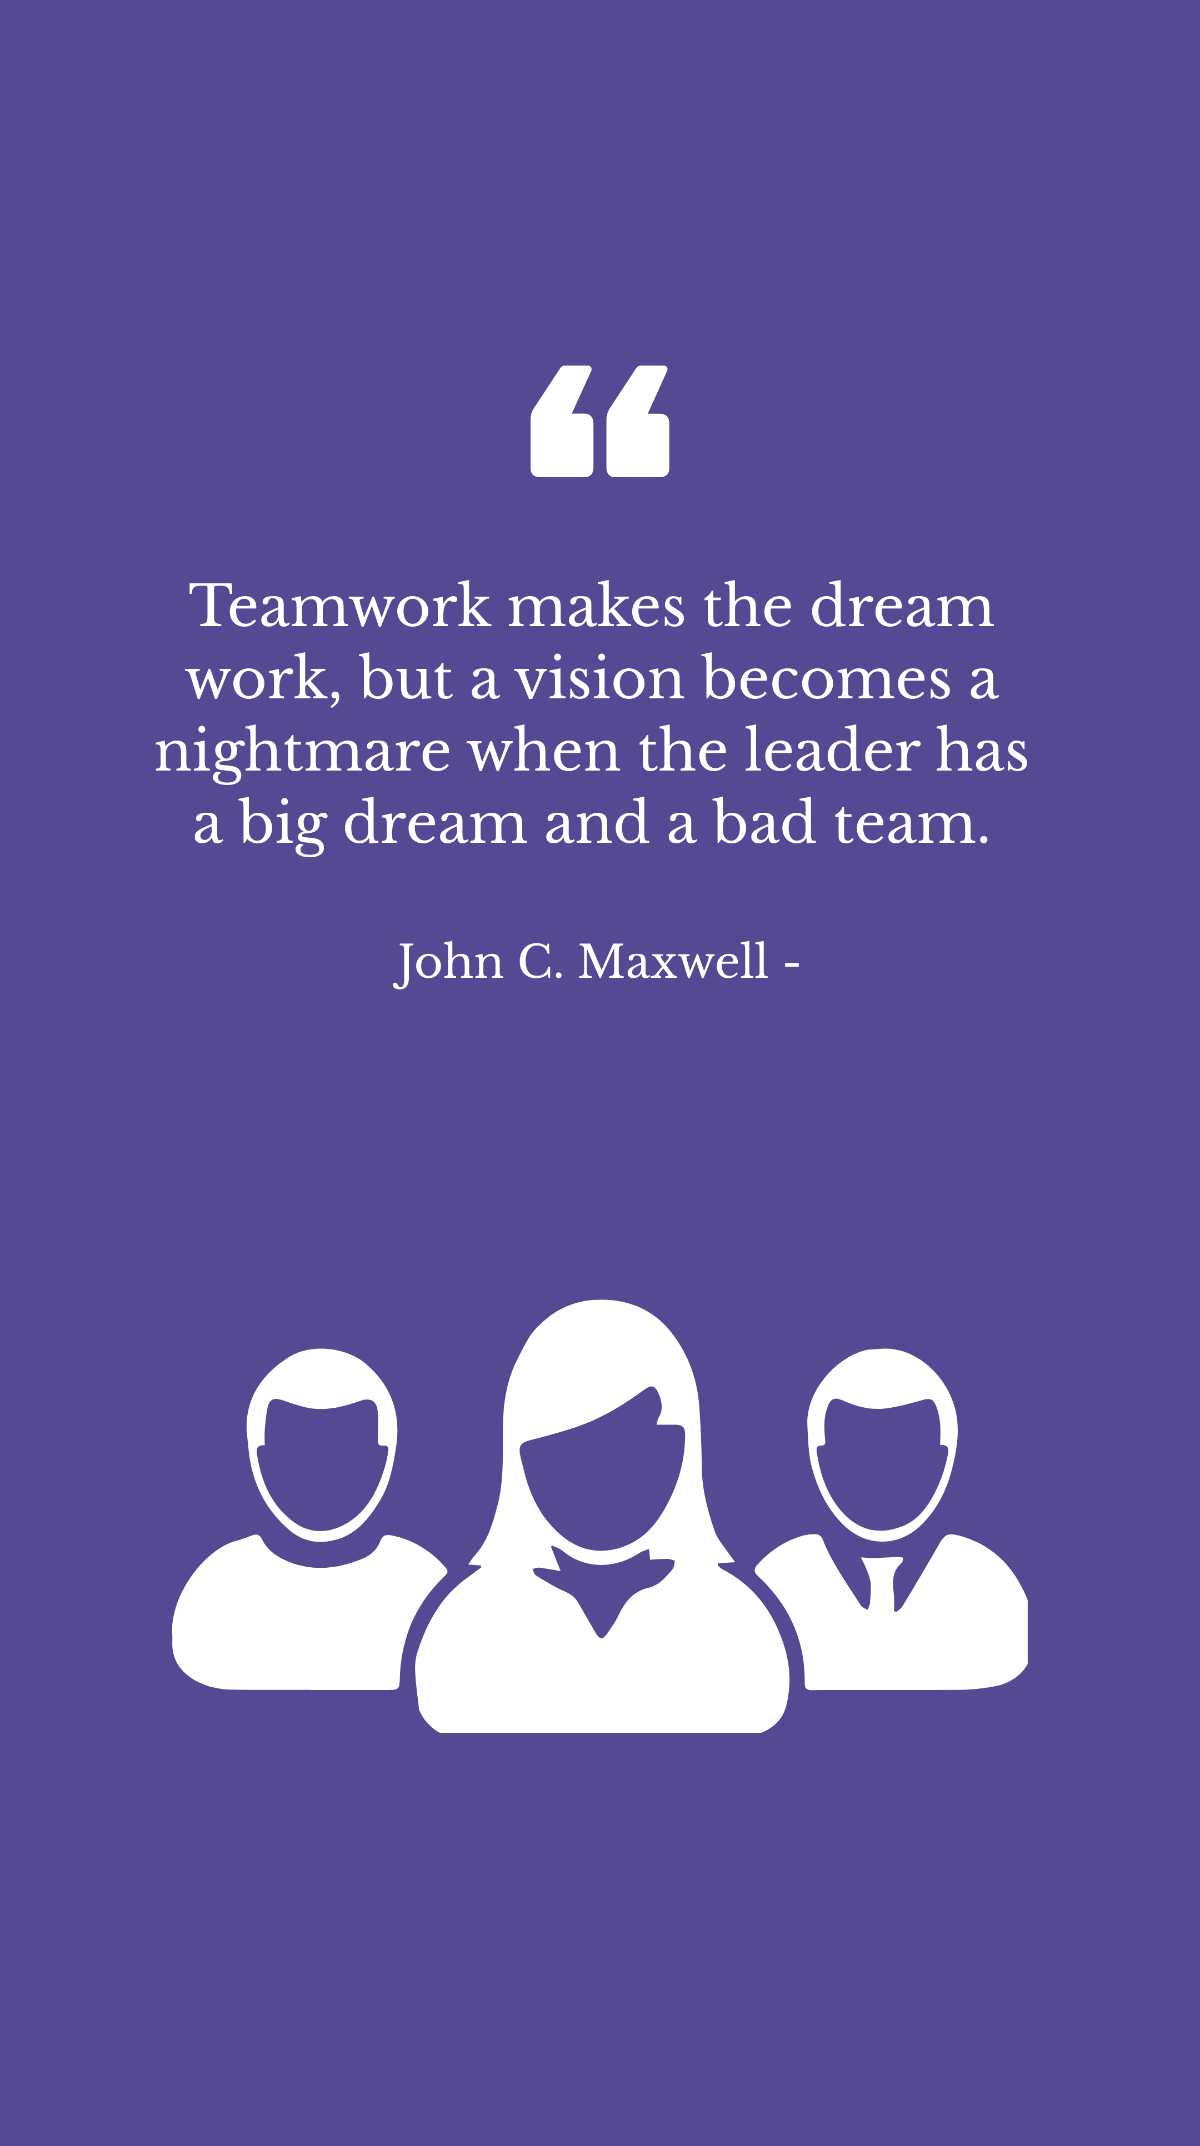 John C. Maxwell - Teamwork makes the dream work, but a vision becomes a nightmare when the leader has a big dream and a bad team. Template